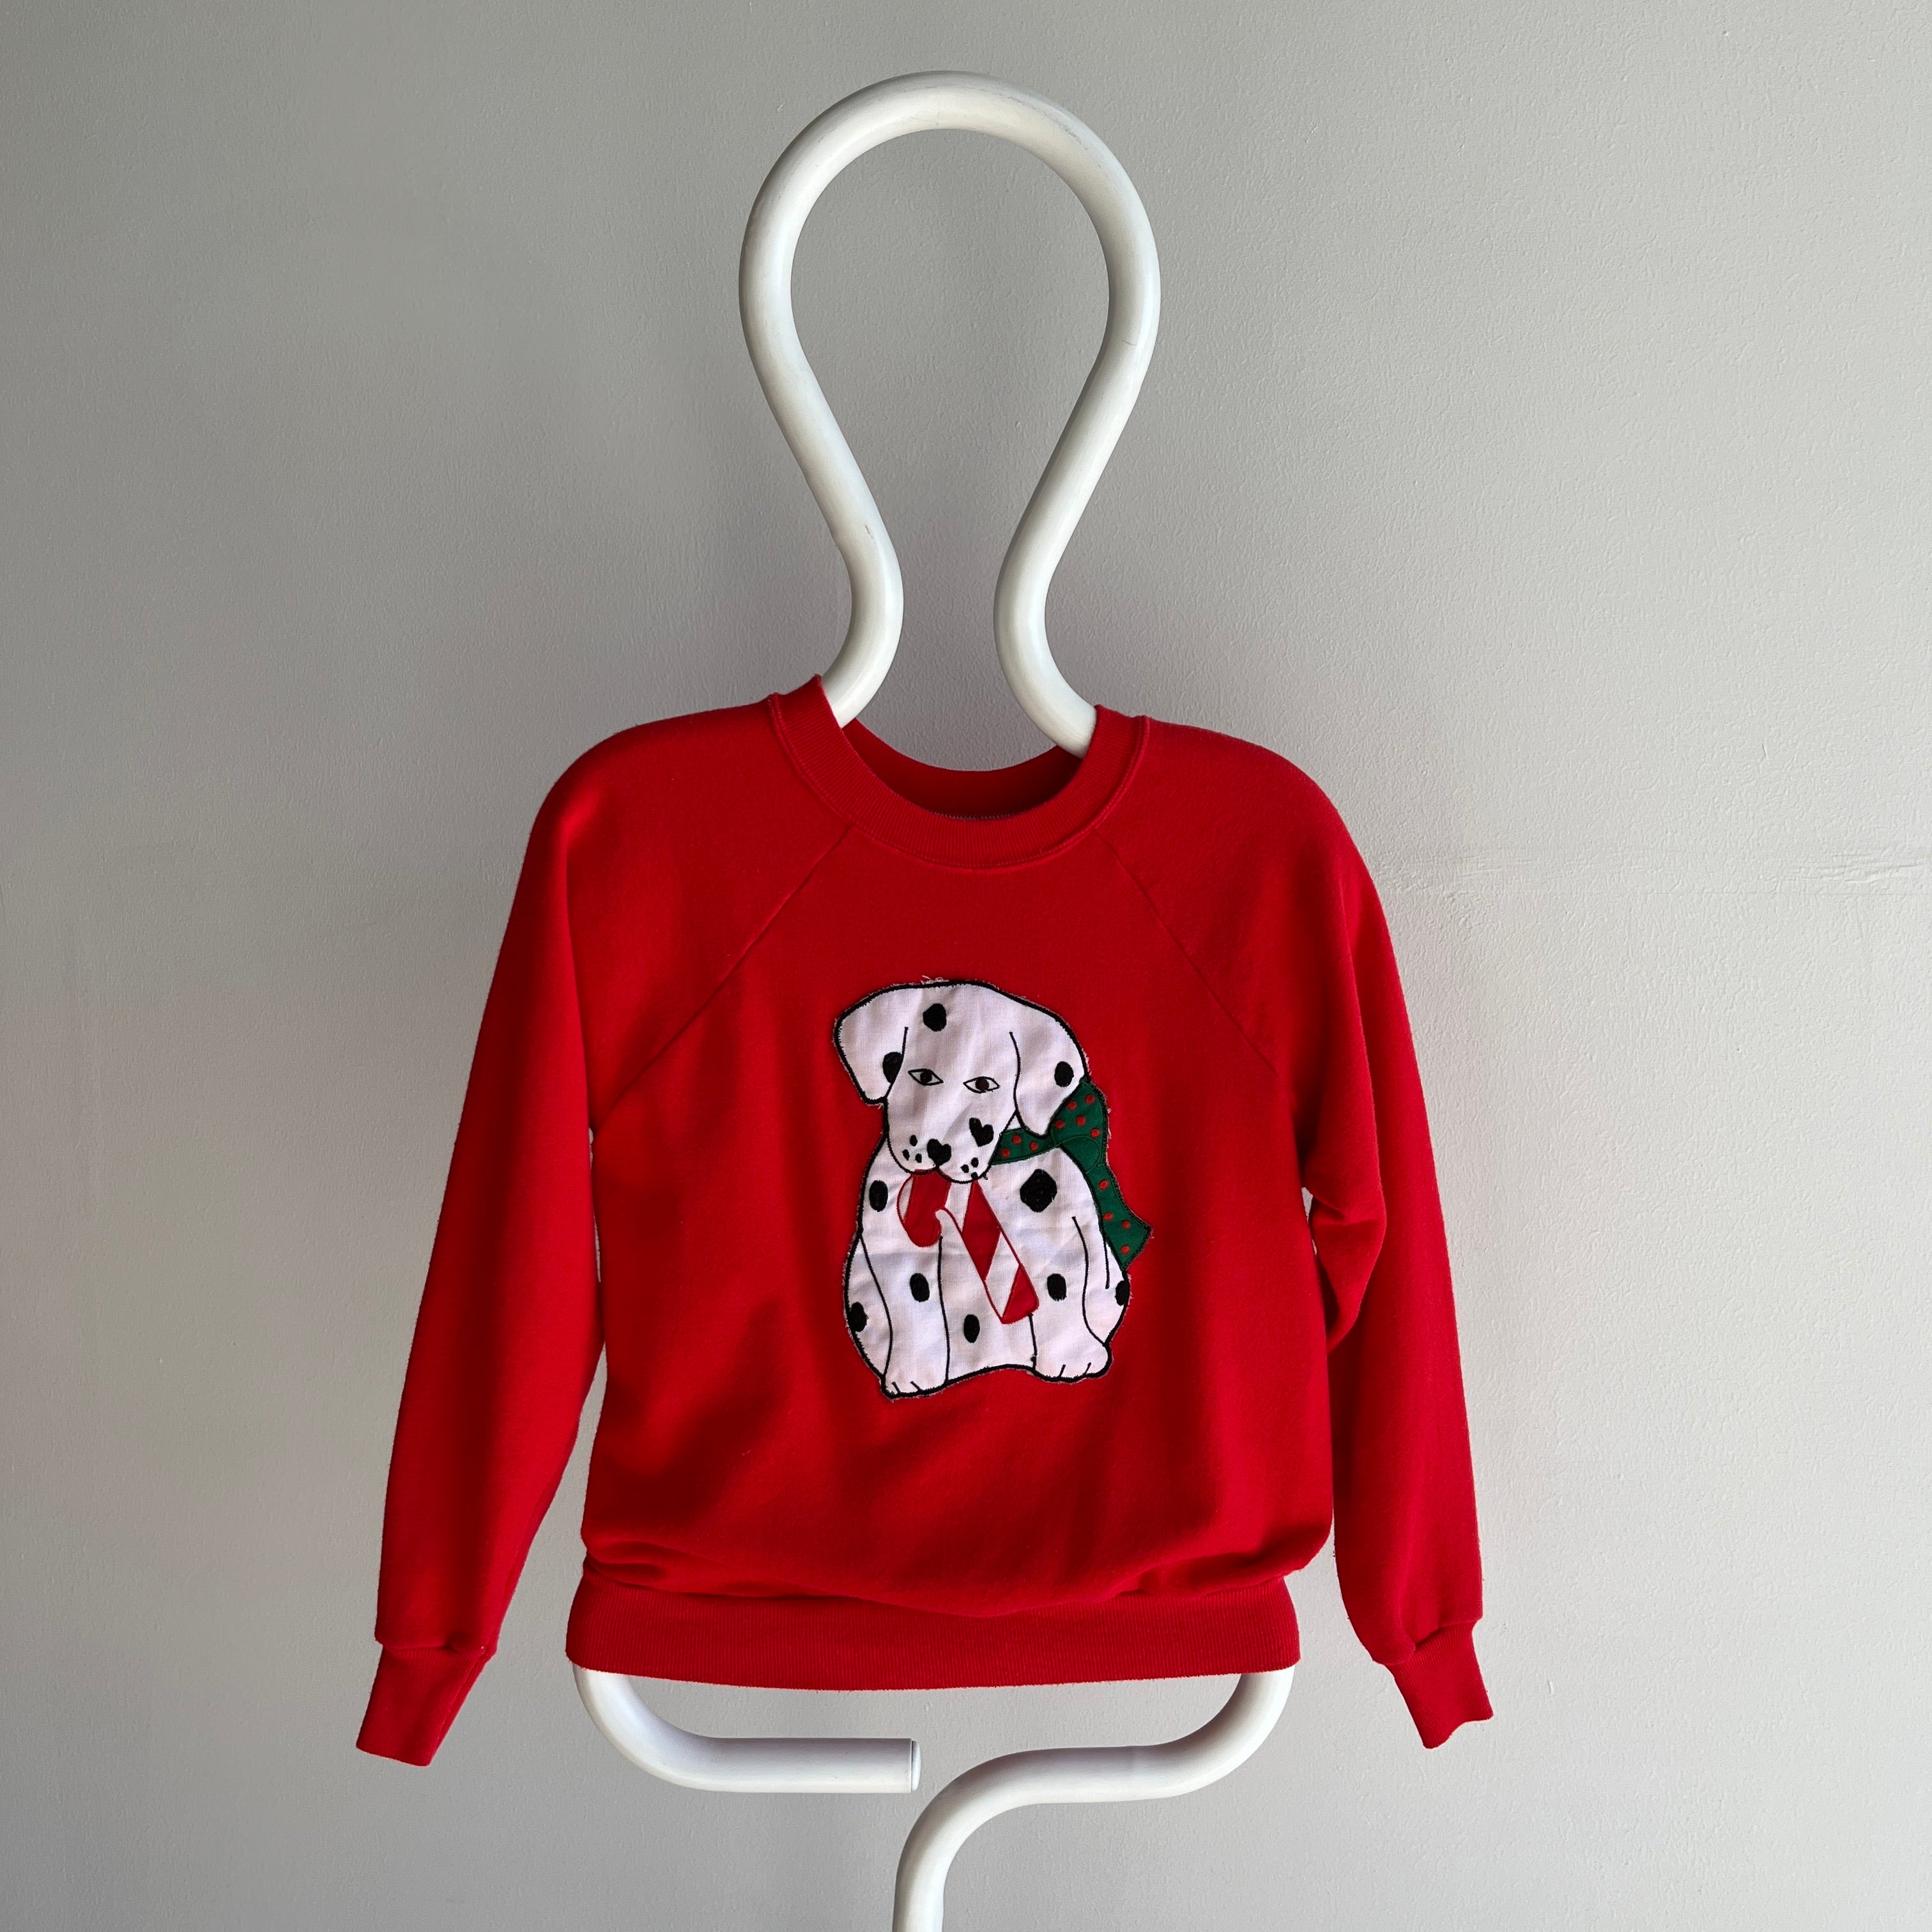 1980s Dalmatian Puppy and a Candy Cane Sweatshirt